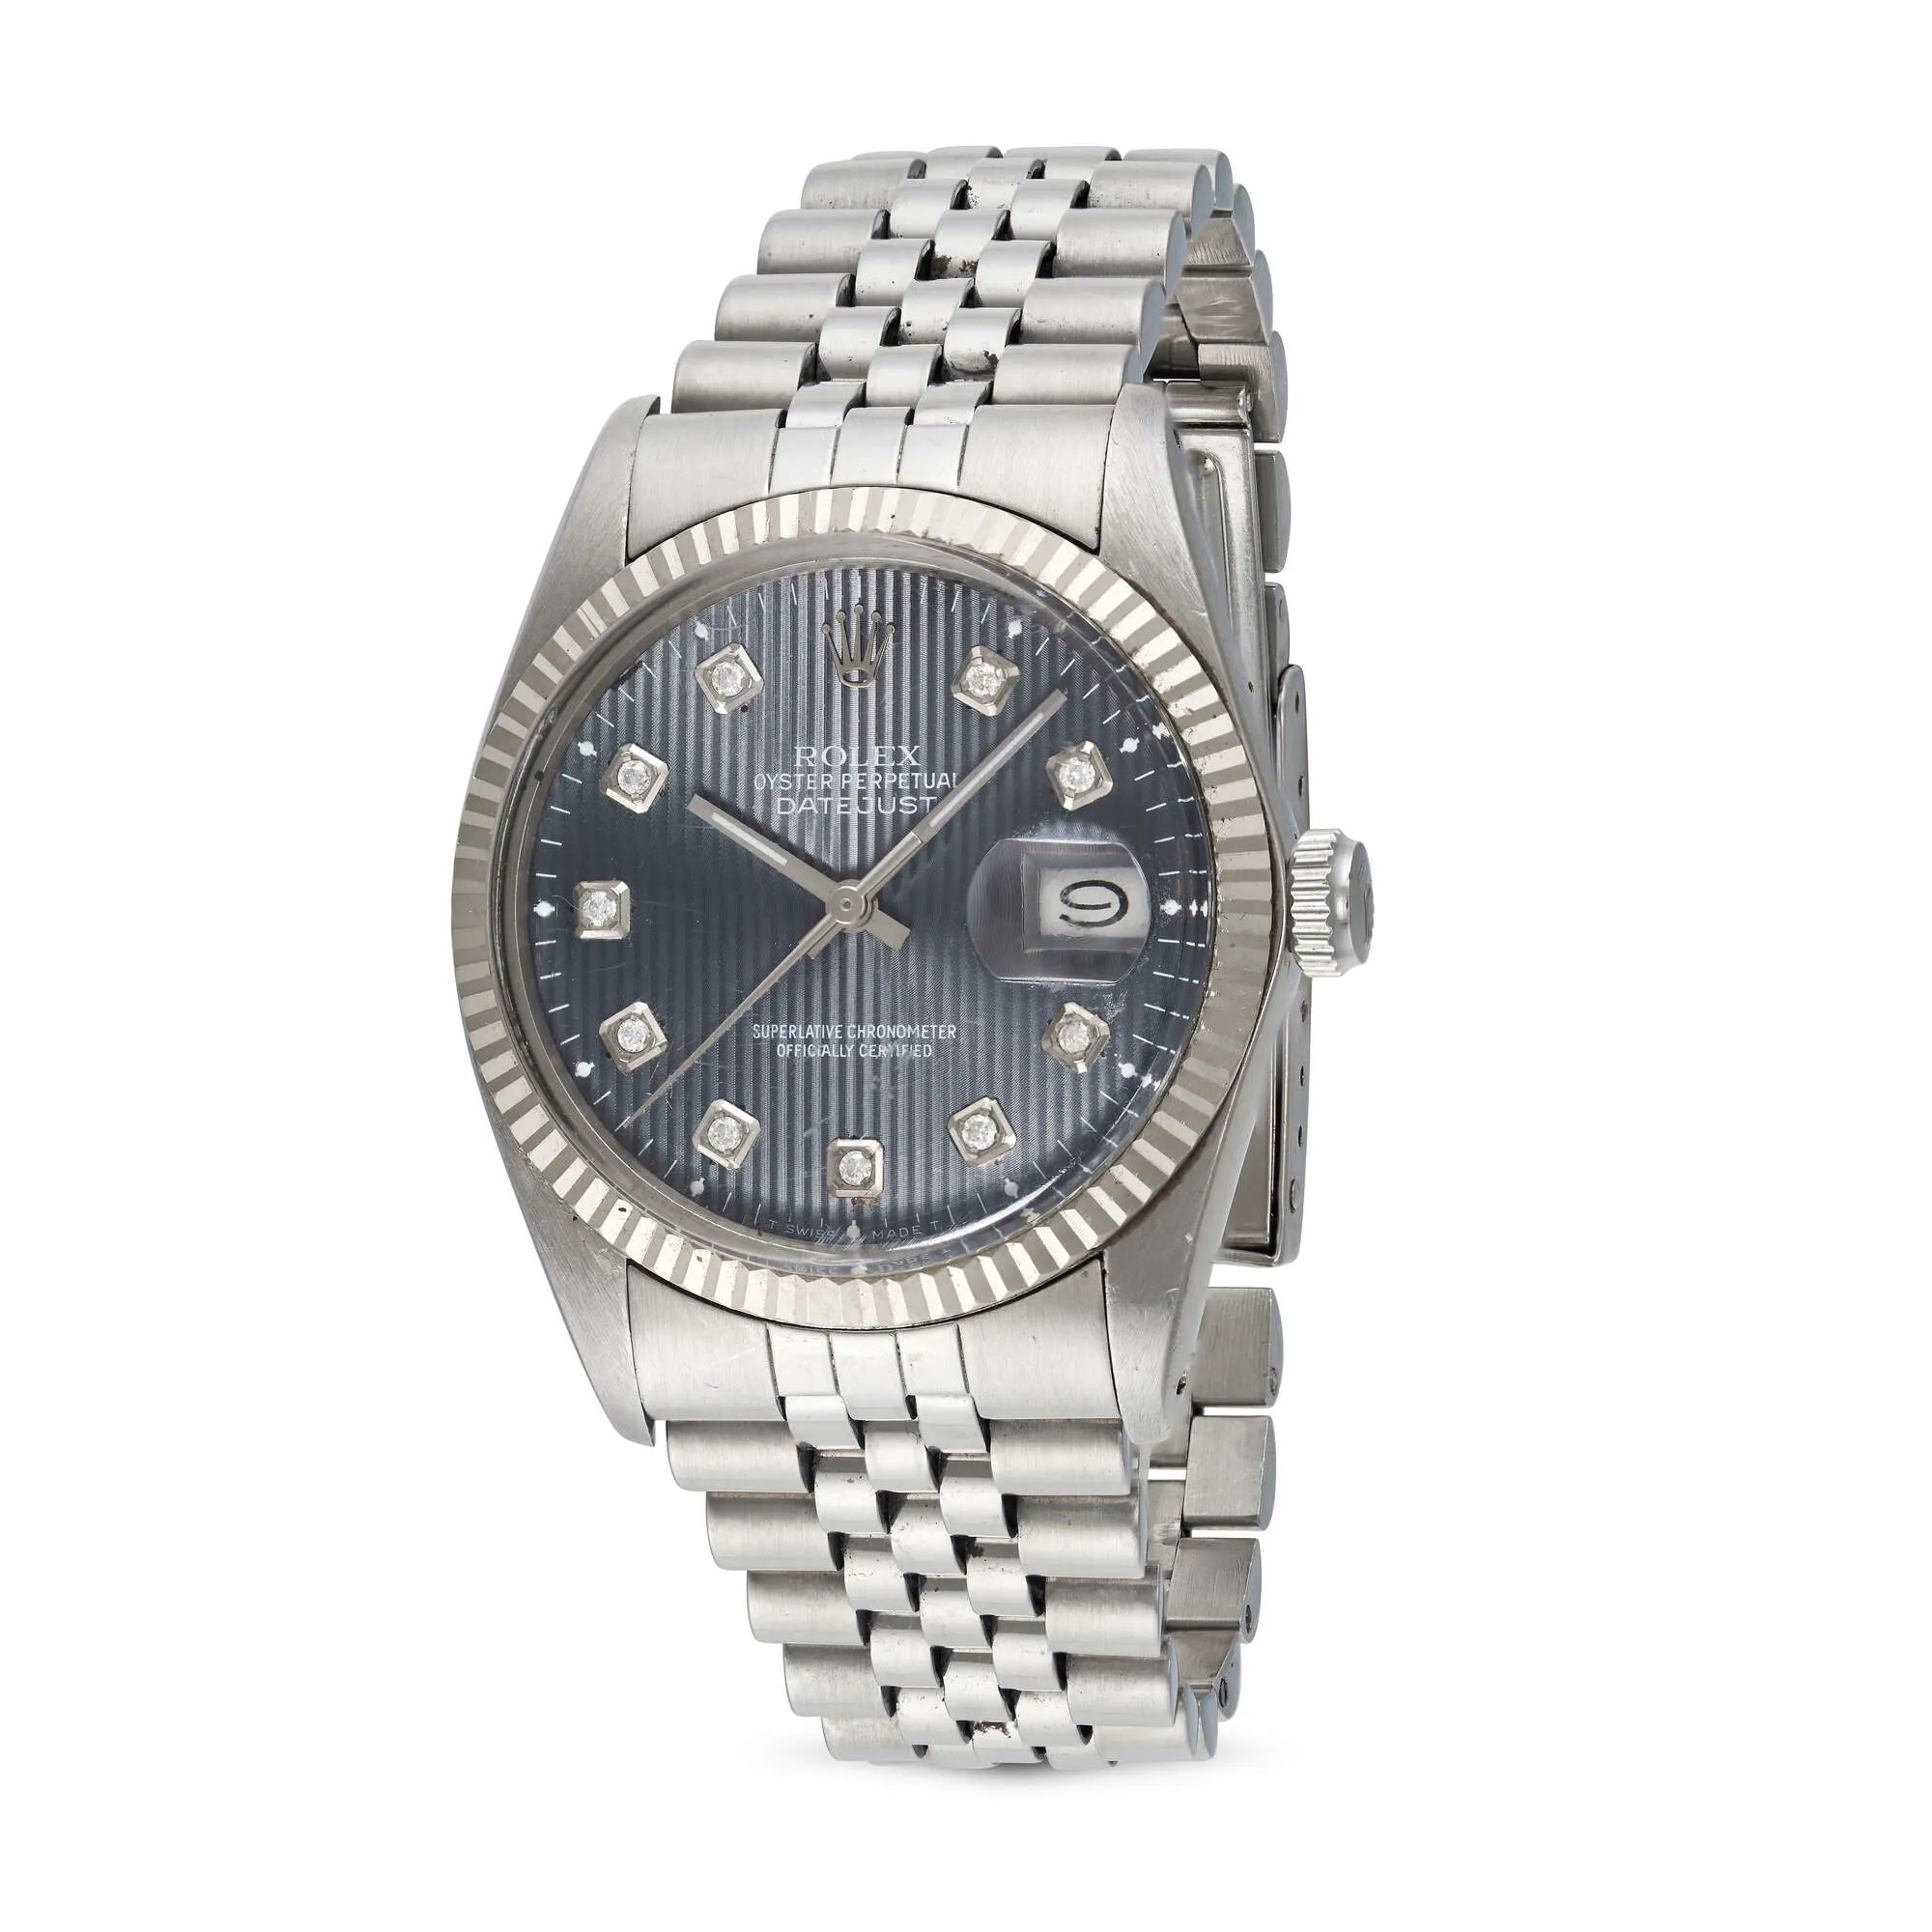 Rolex Datejust 36 16014 35mm Stainless steel Gray